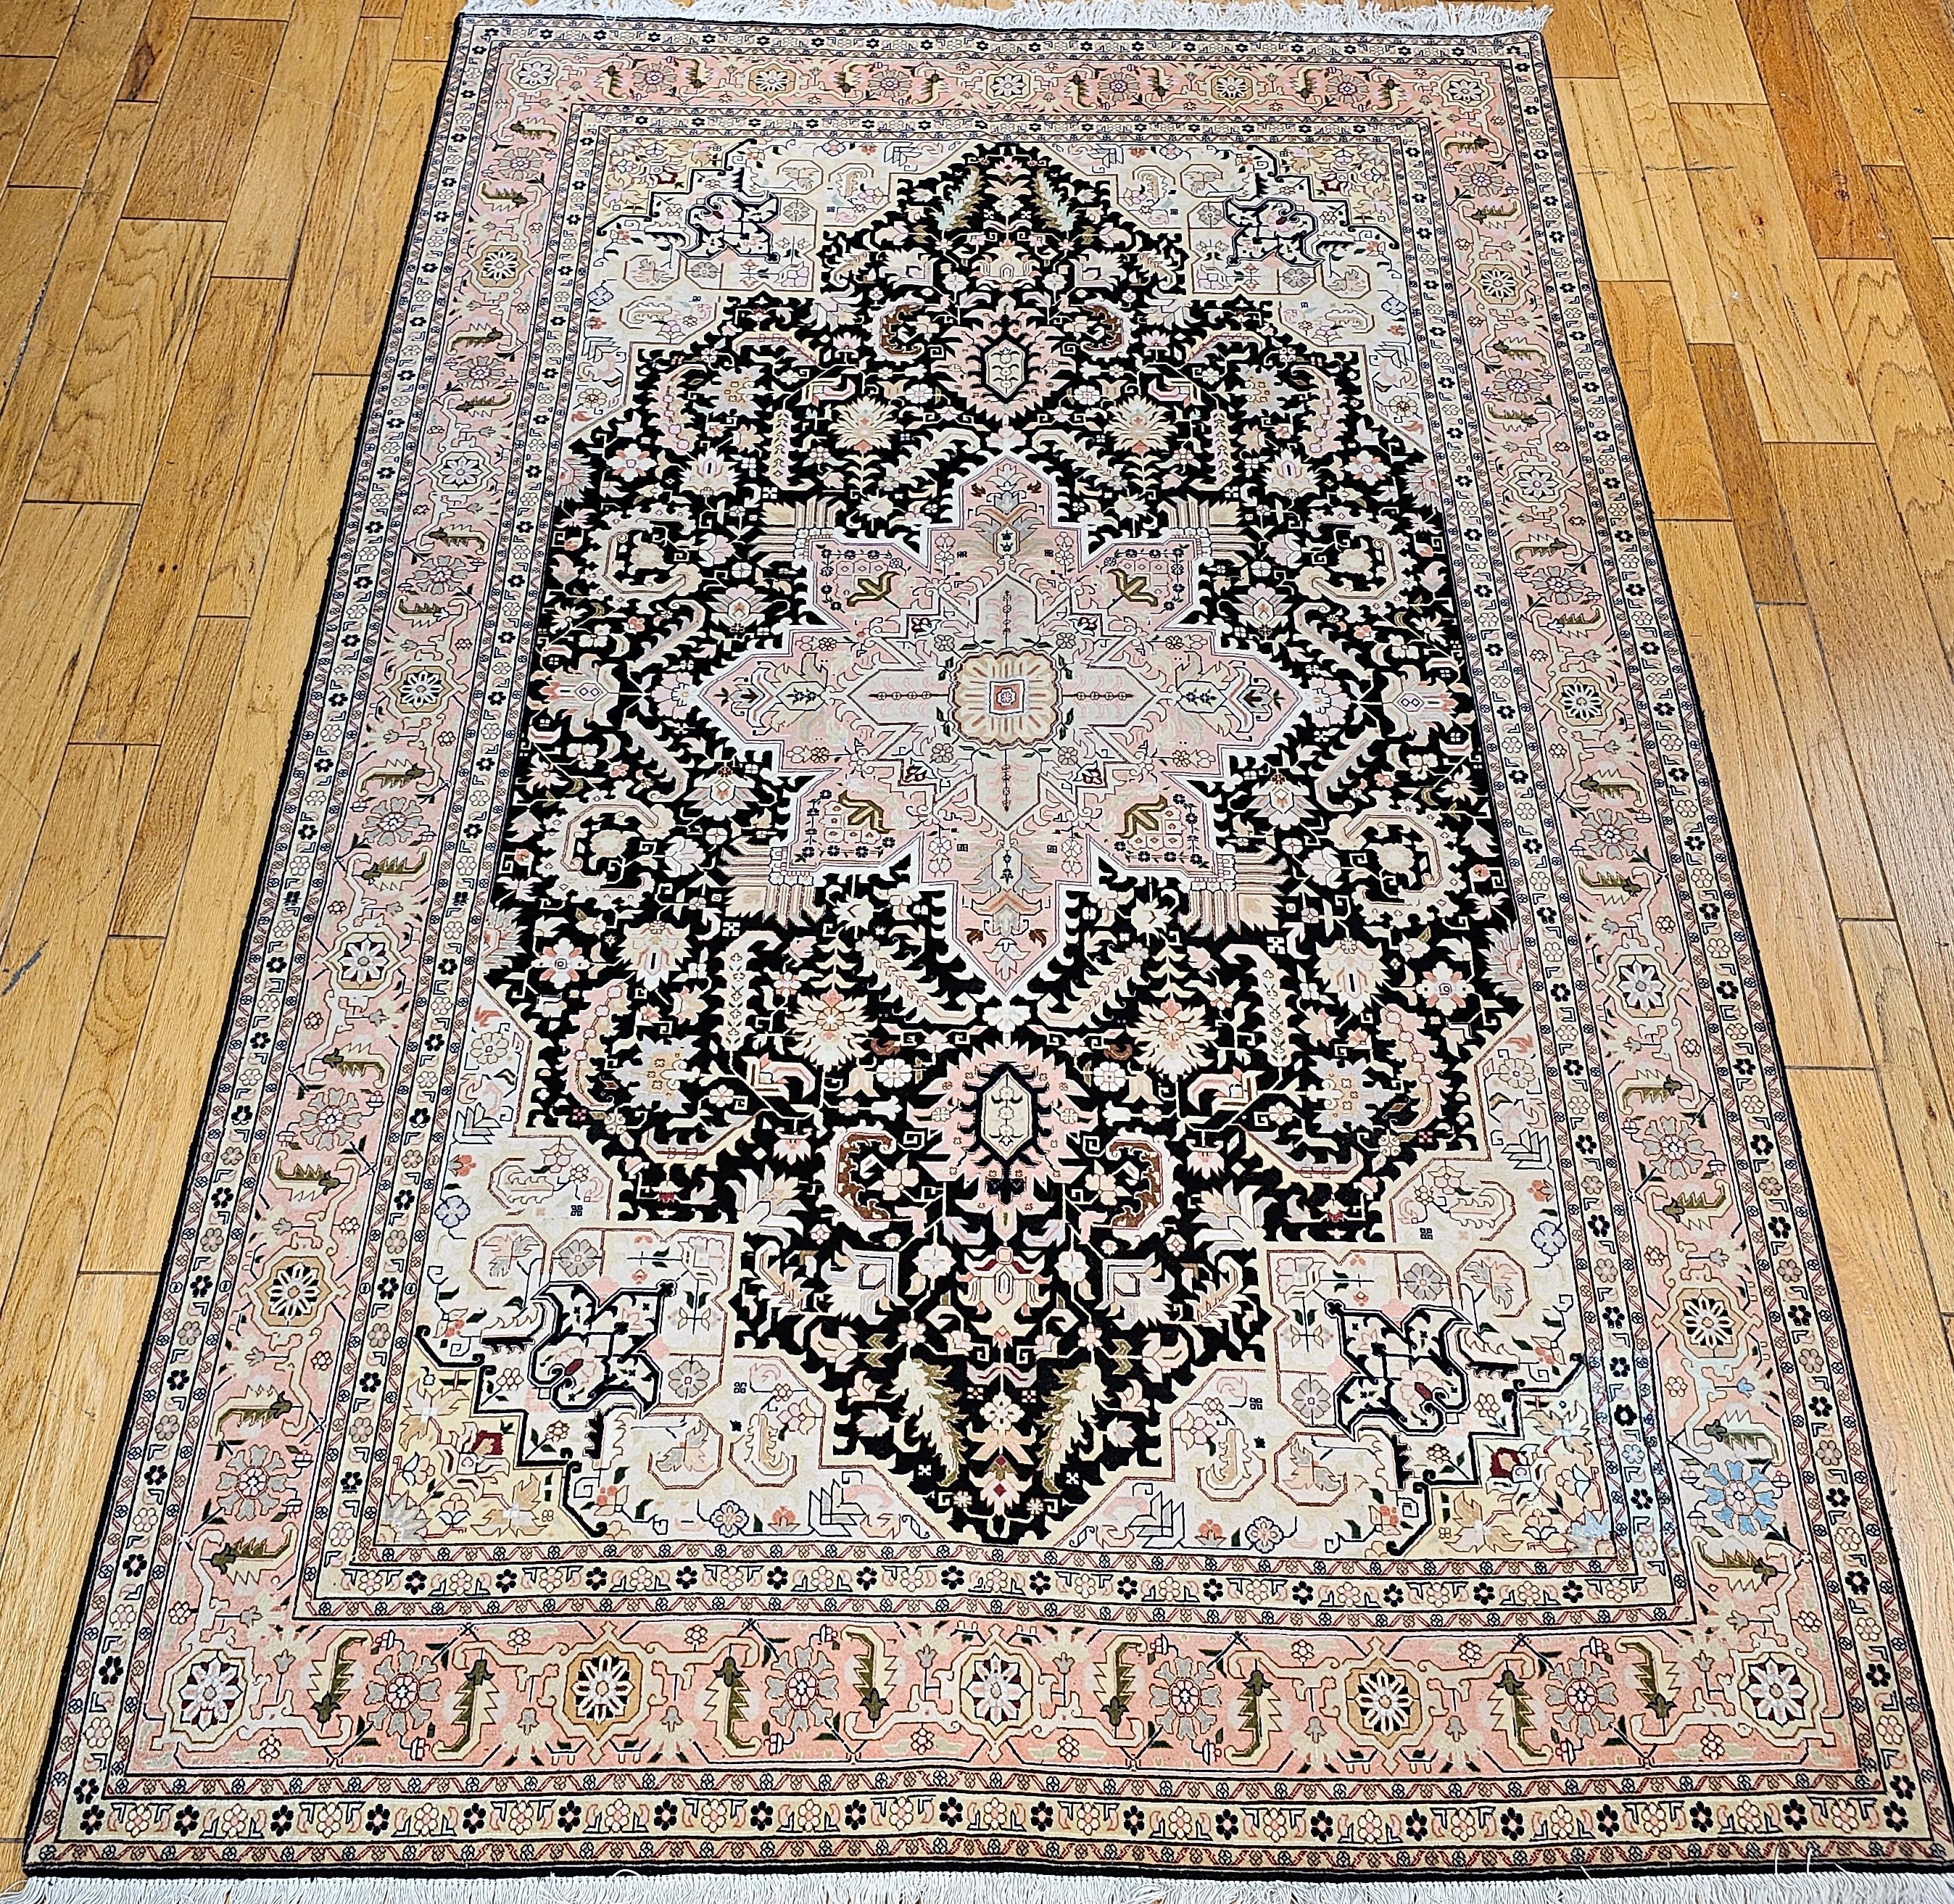 A very rare and beautiful black background color Persian Tabriz workshop rug in the style of a geometric Persian Heriz village rug.  The rug has a wool pile on a cotton foundation and silk highlights to present a classic antique village design in a